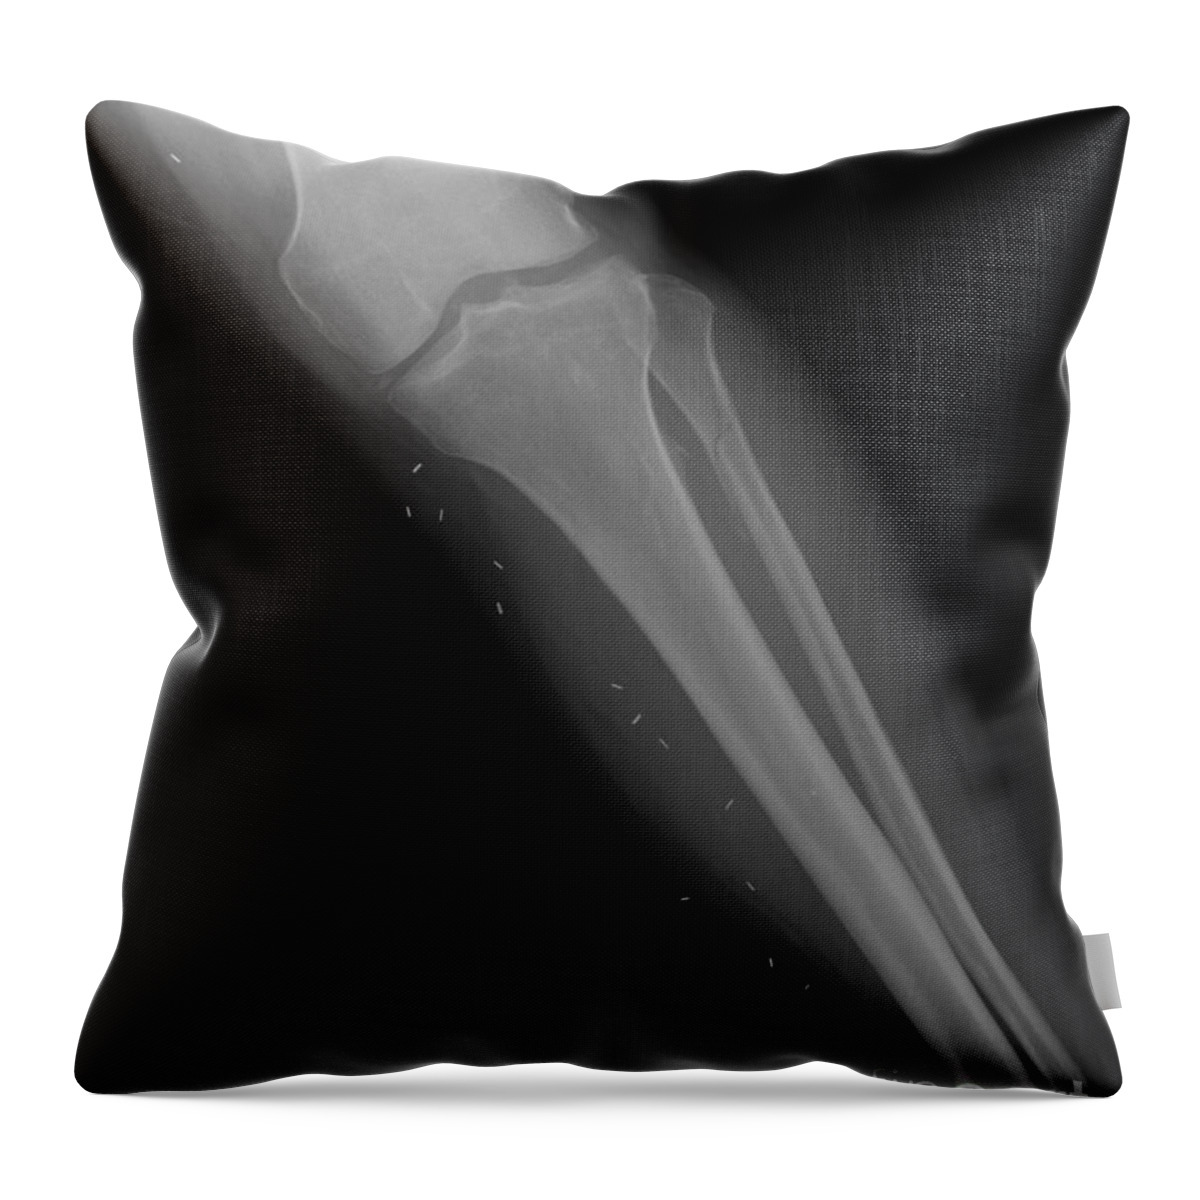 Xray Throw Pillow featuring the photograph X-ray Of Broken Leg by Ted Kinsman